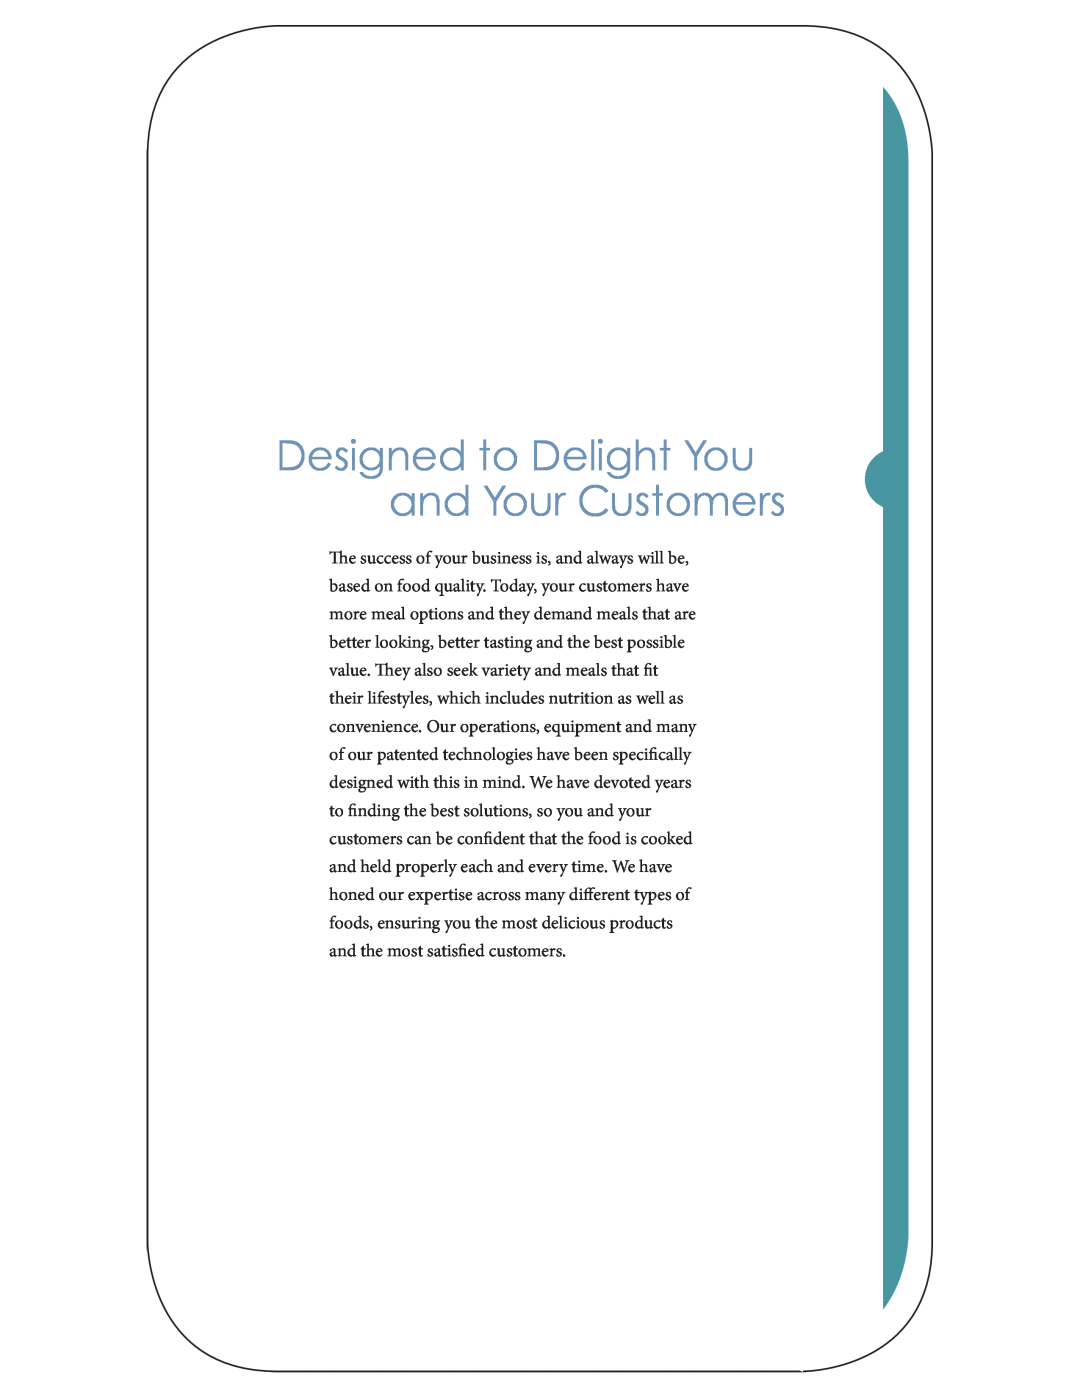 Henny Penny none manual Designed to Delight You and Your Customers 